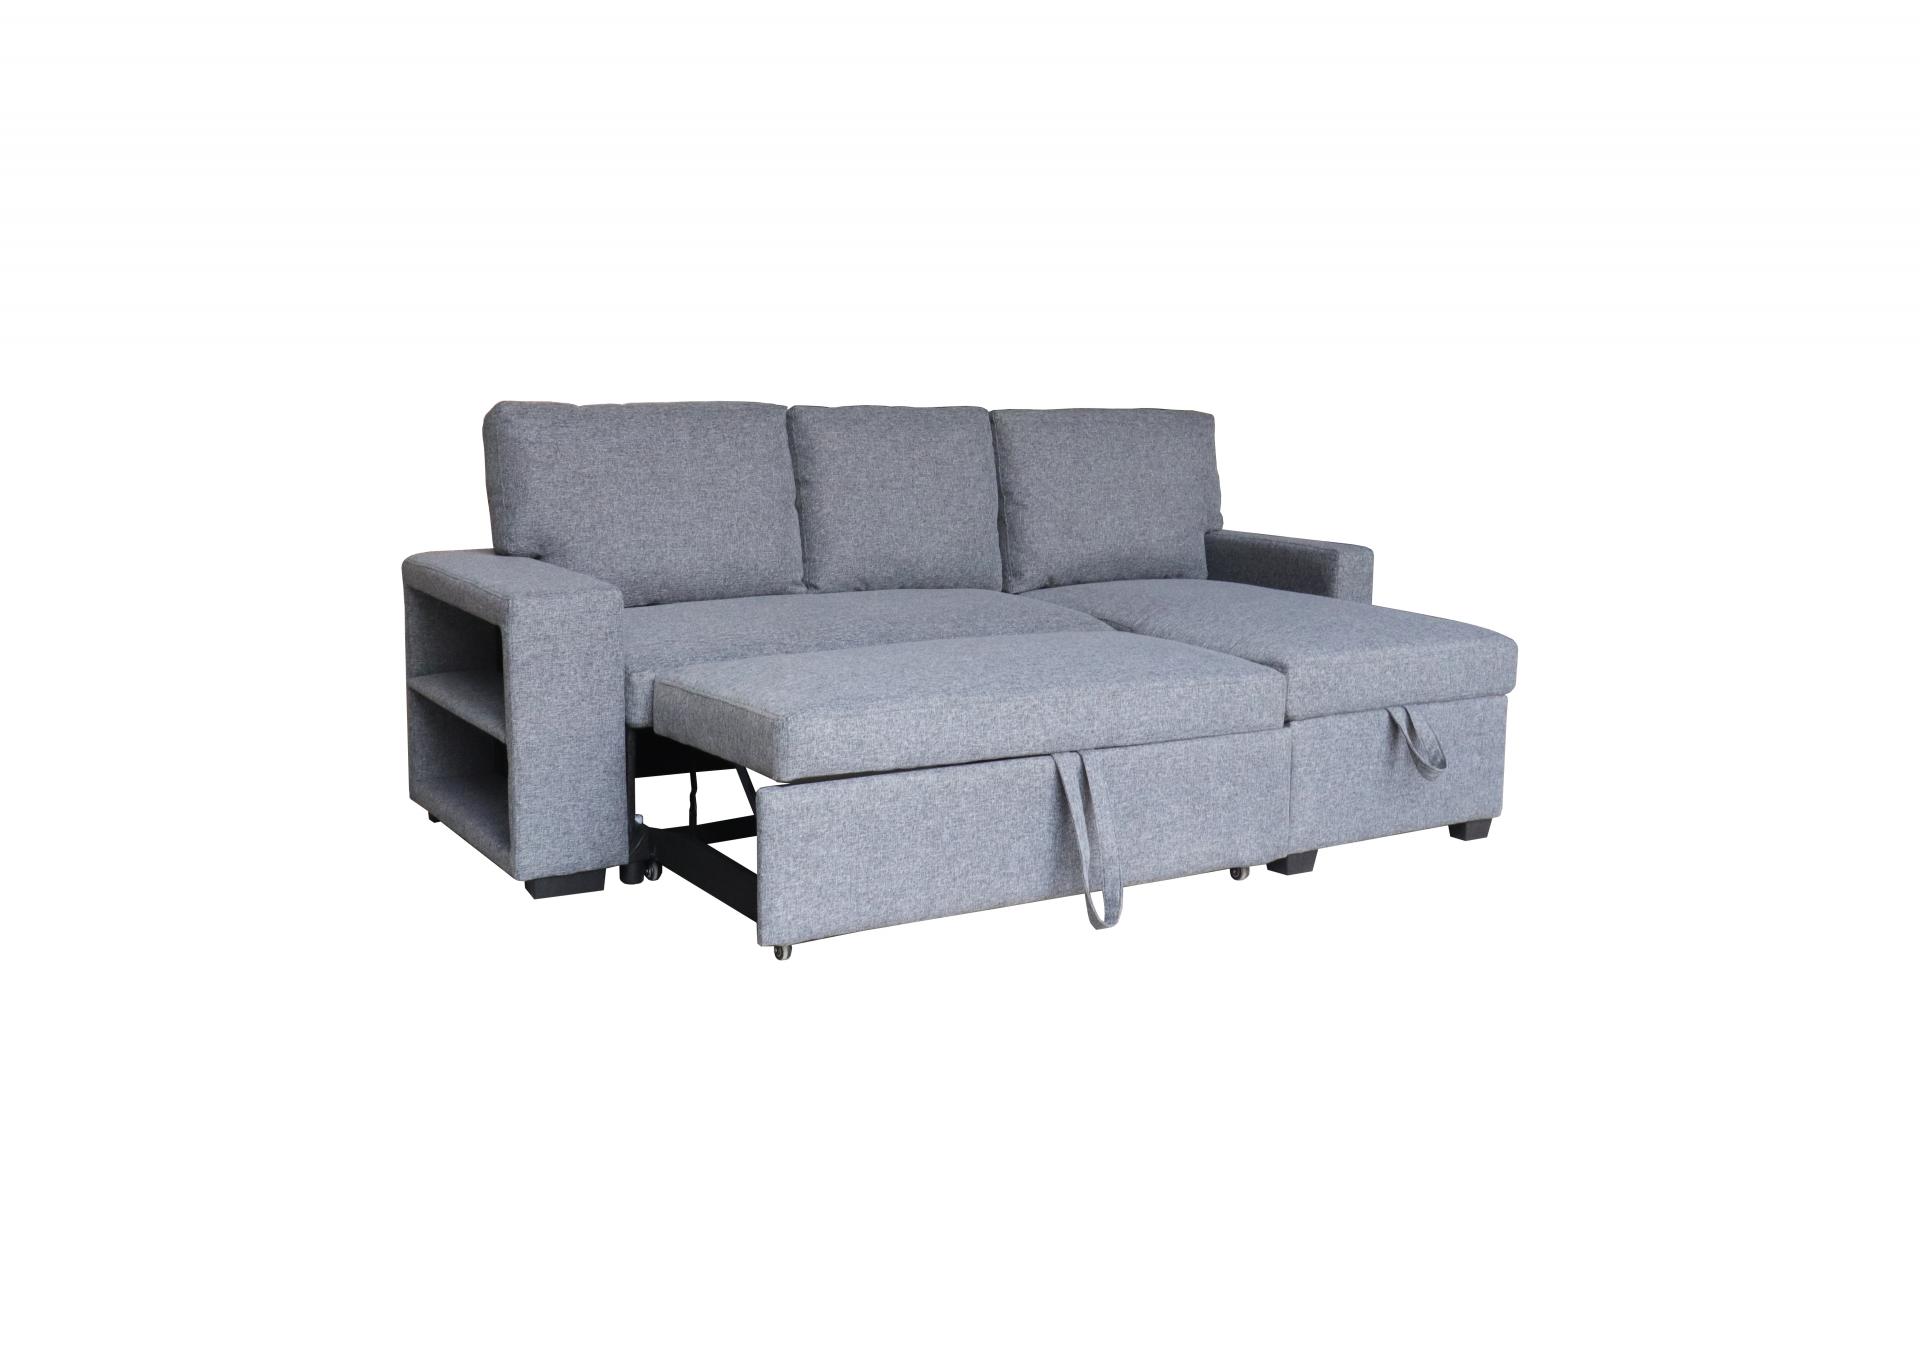 Media Sofa With Storage in Chaise